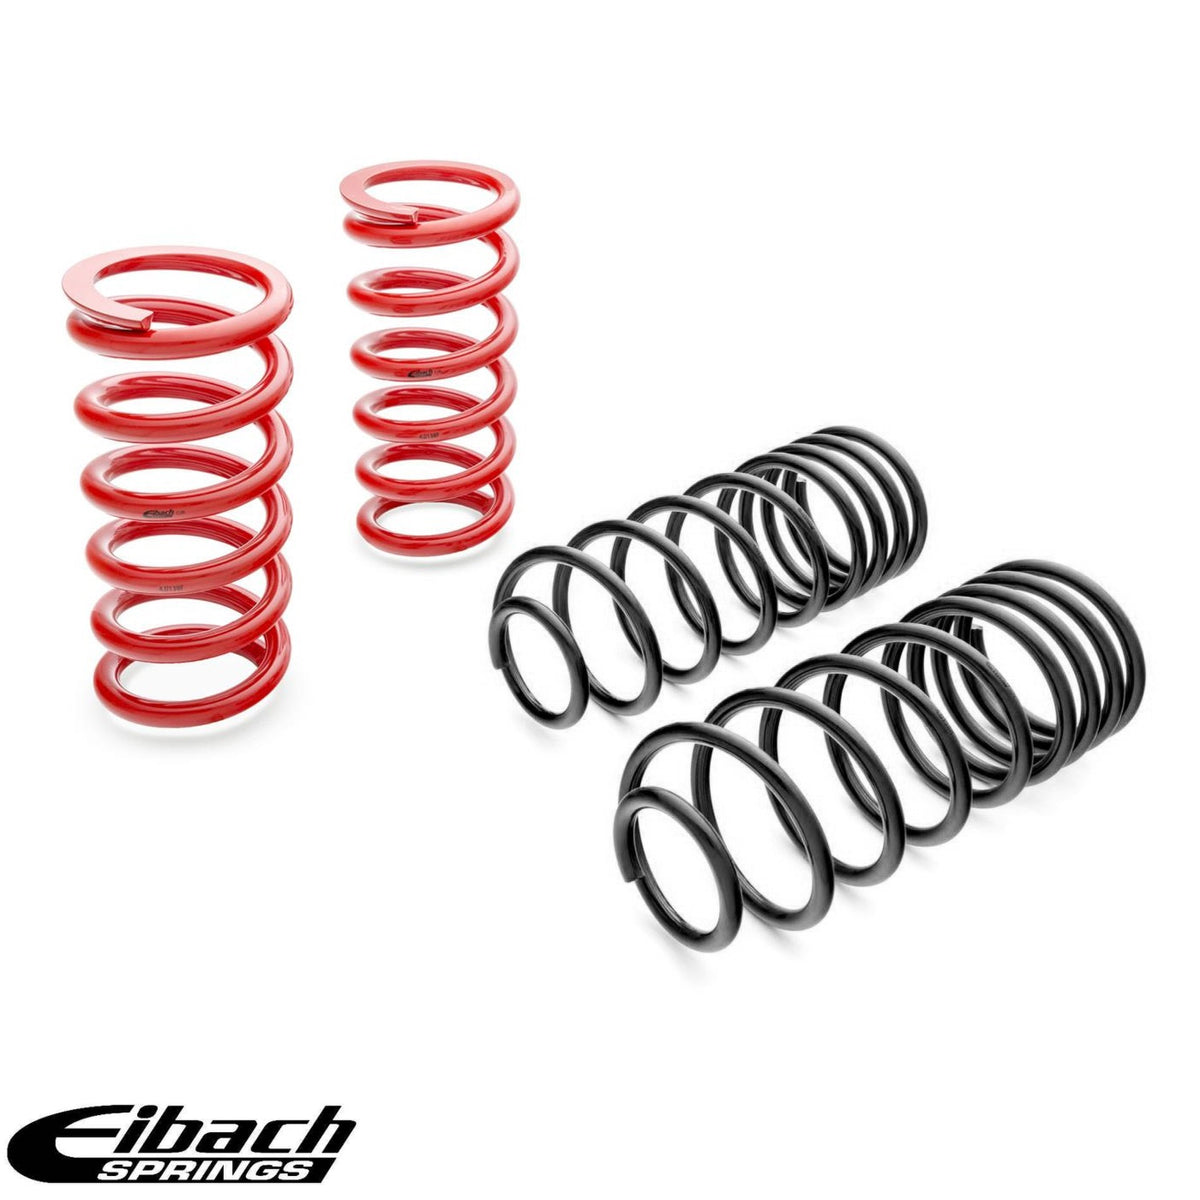 Eibach Pro Springs Kit - Ford Mustang GT 2015-23 Non Magneride